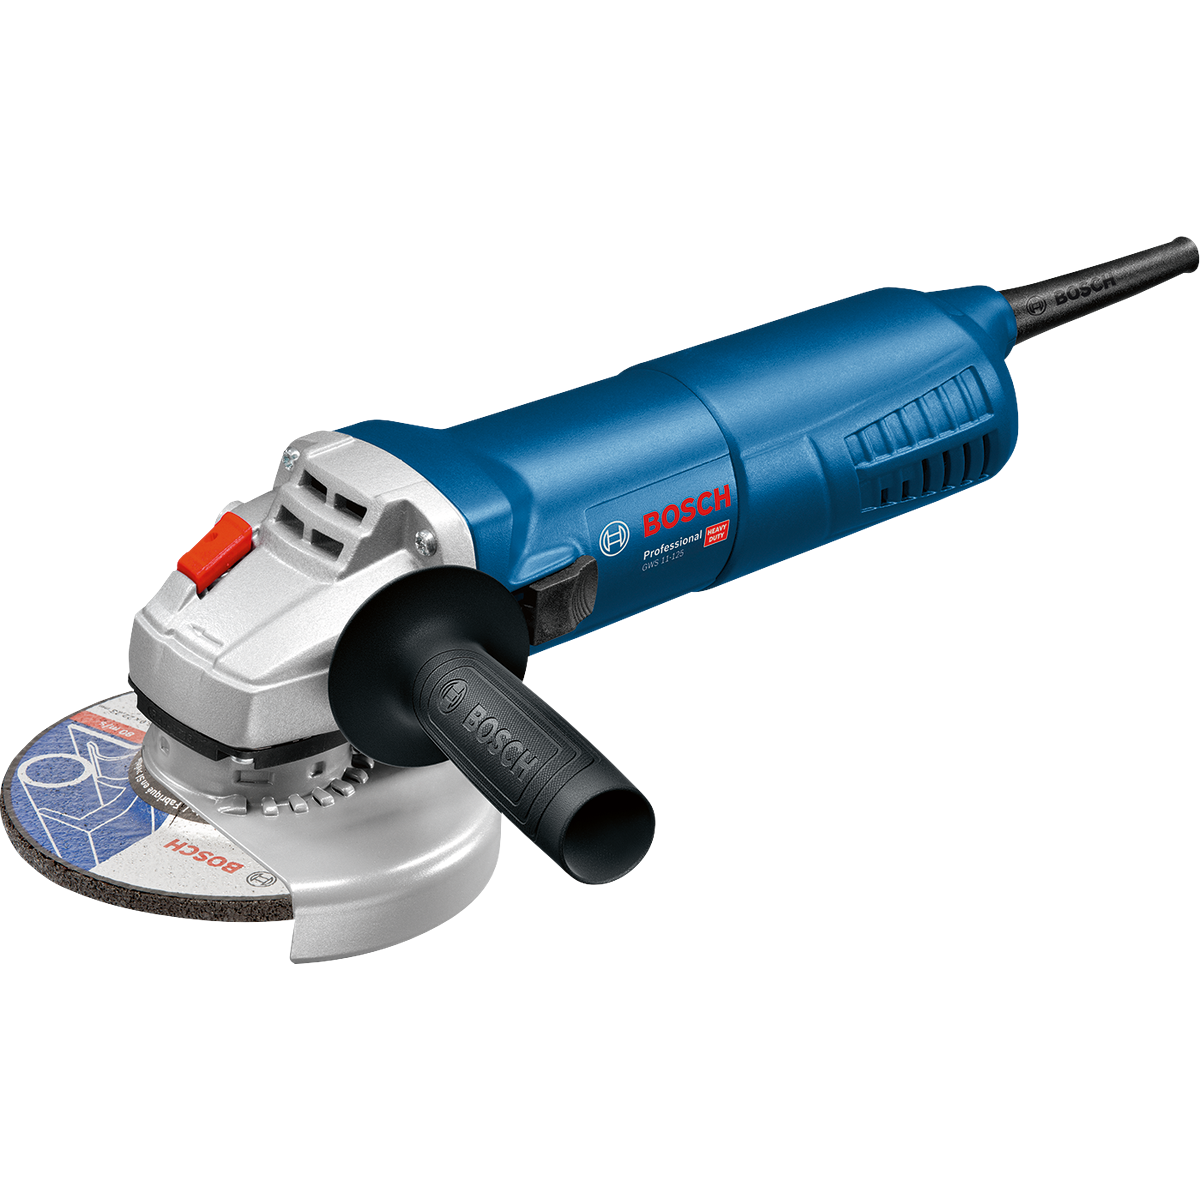 Bosch Professional Angle Grinder GWS 11-125 060179D002 Power Tool Services